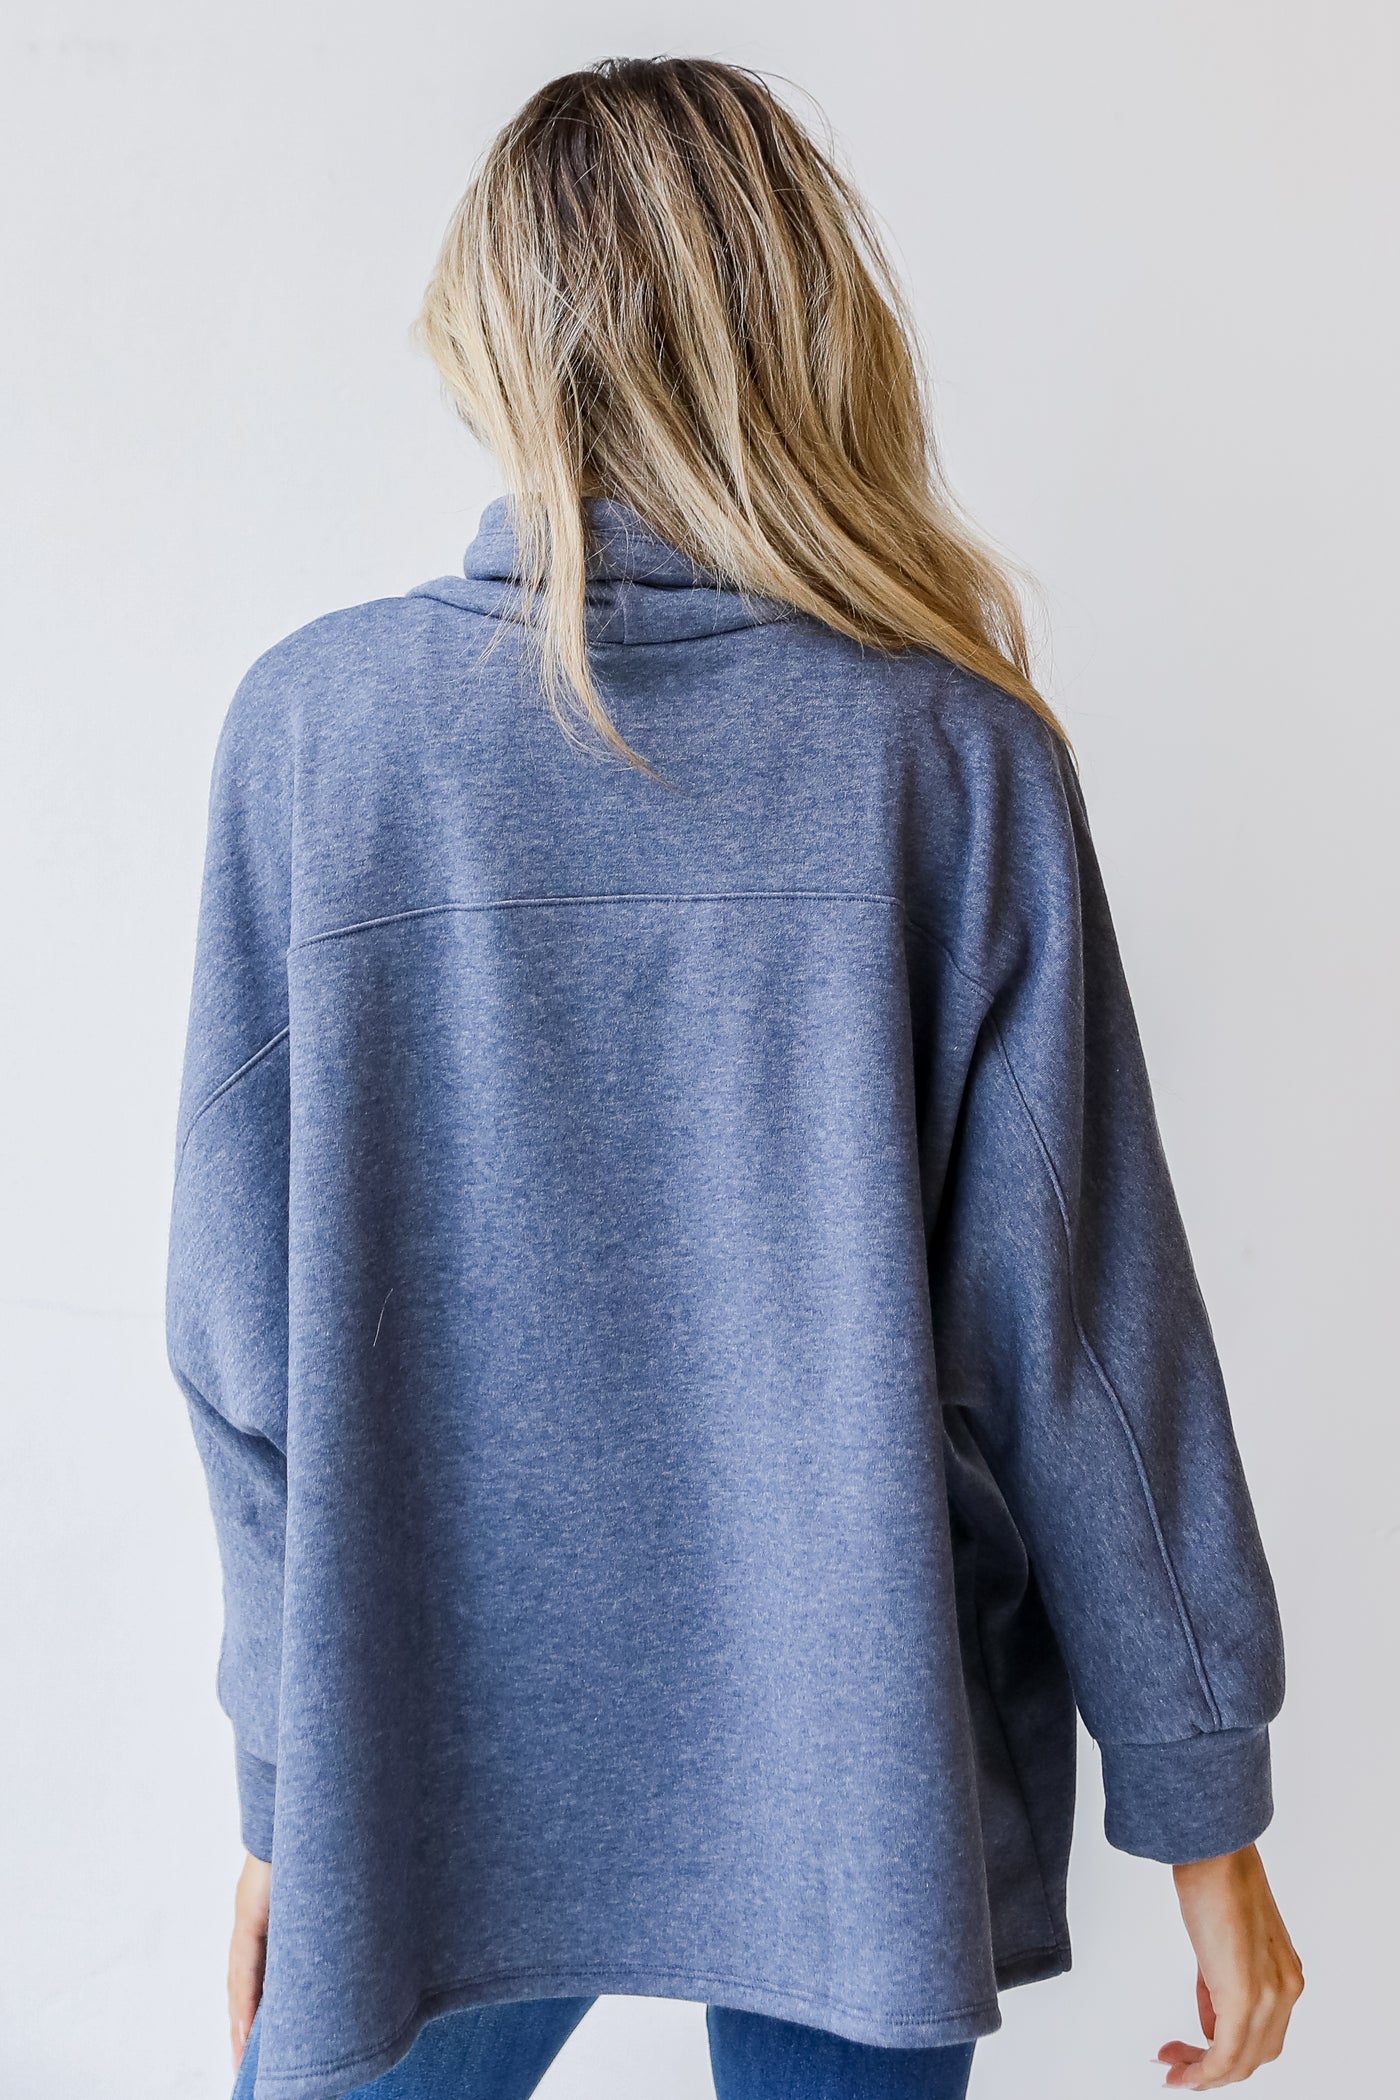 Cowl Neck Pullover in navy back view